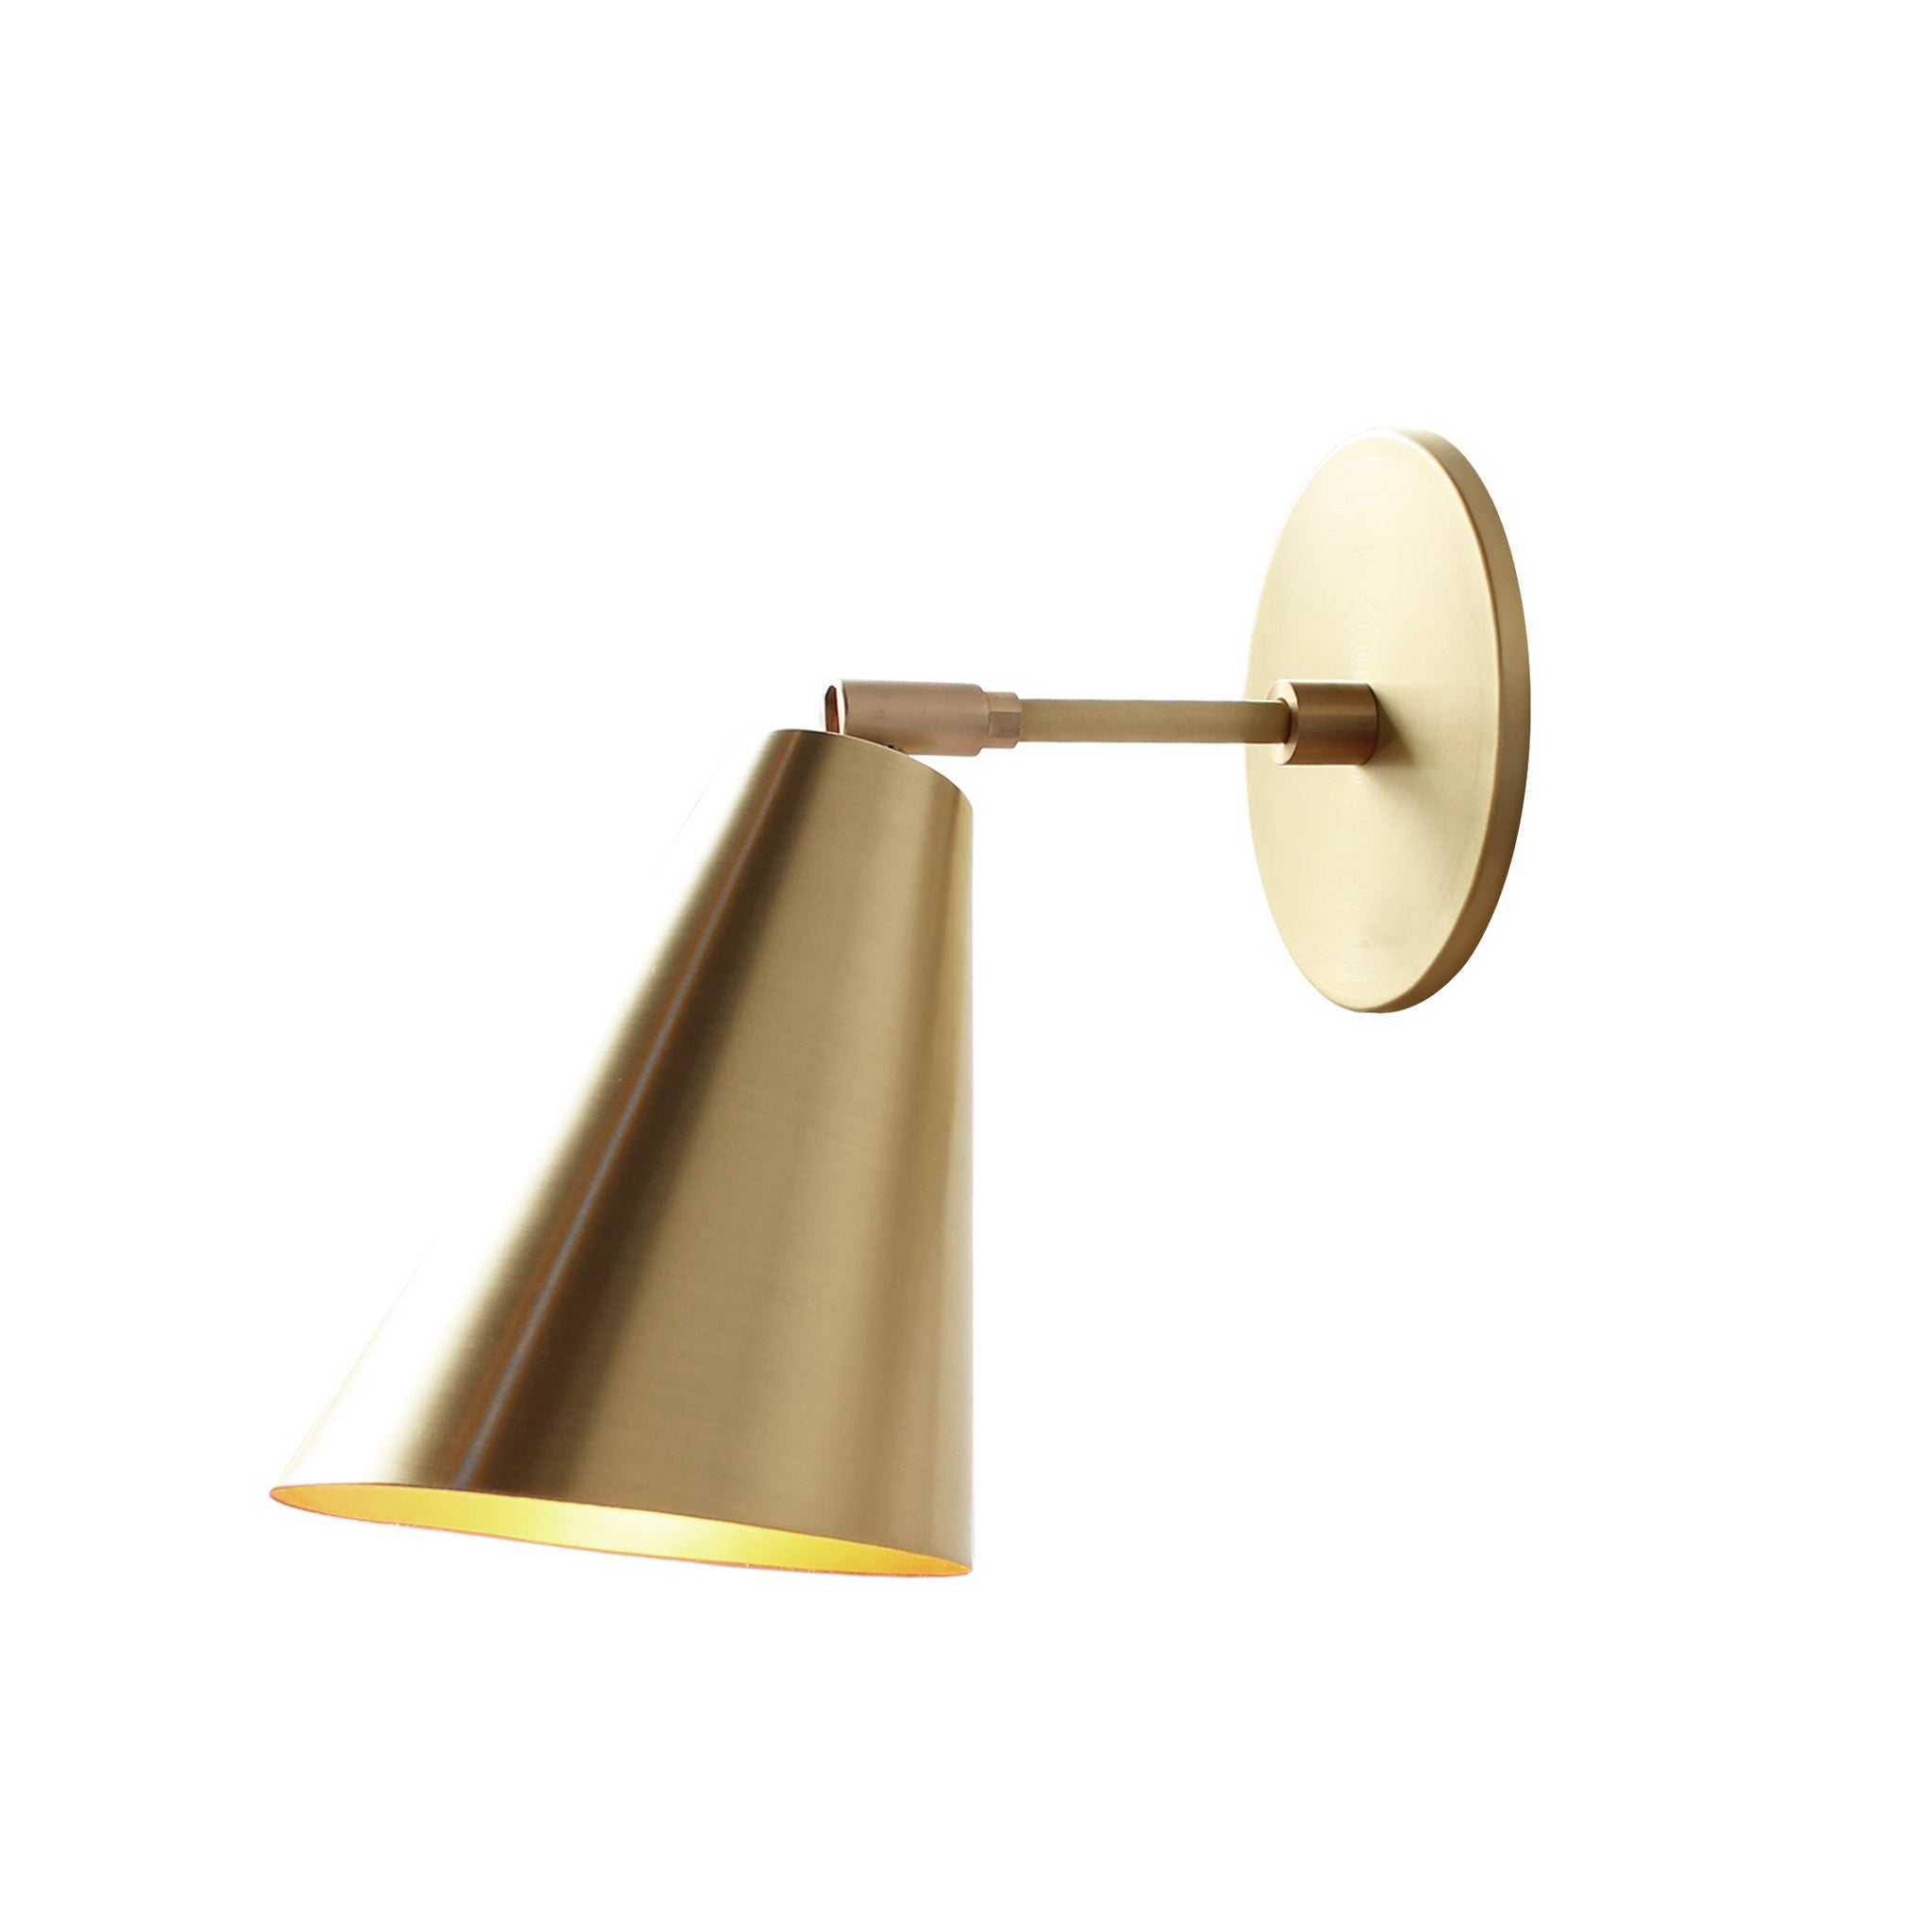 Brass Wall Sconces: Plug-in, LED & More -  